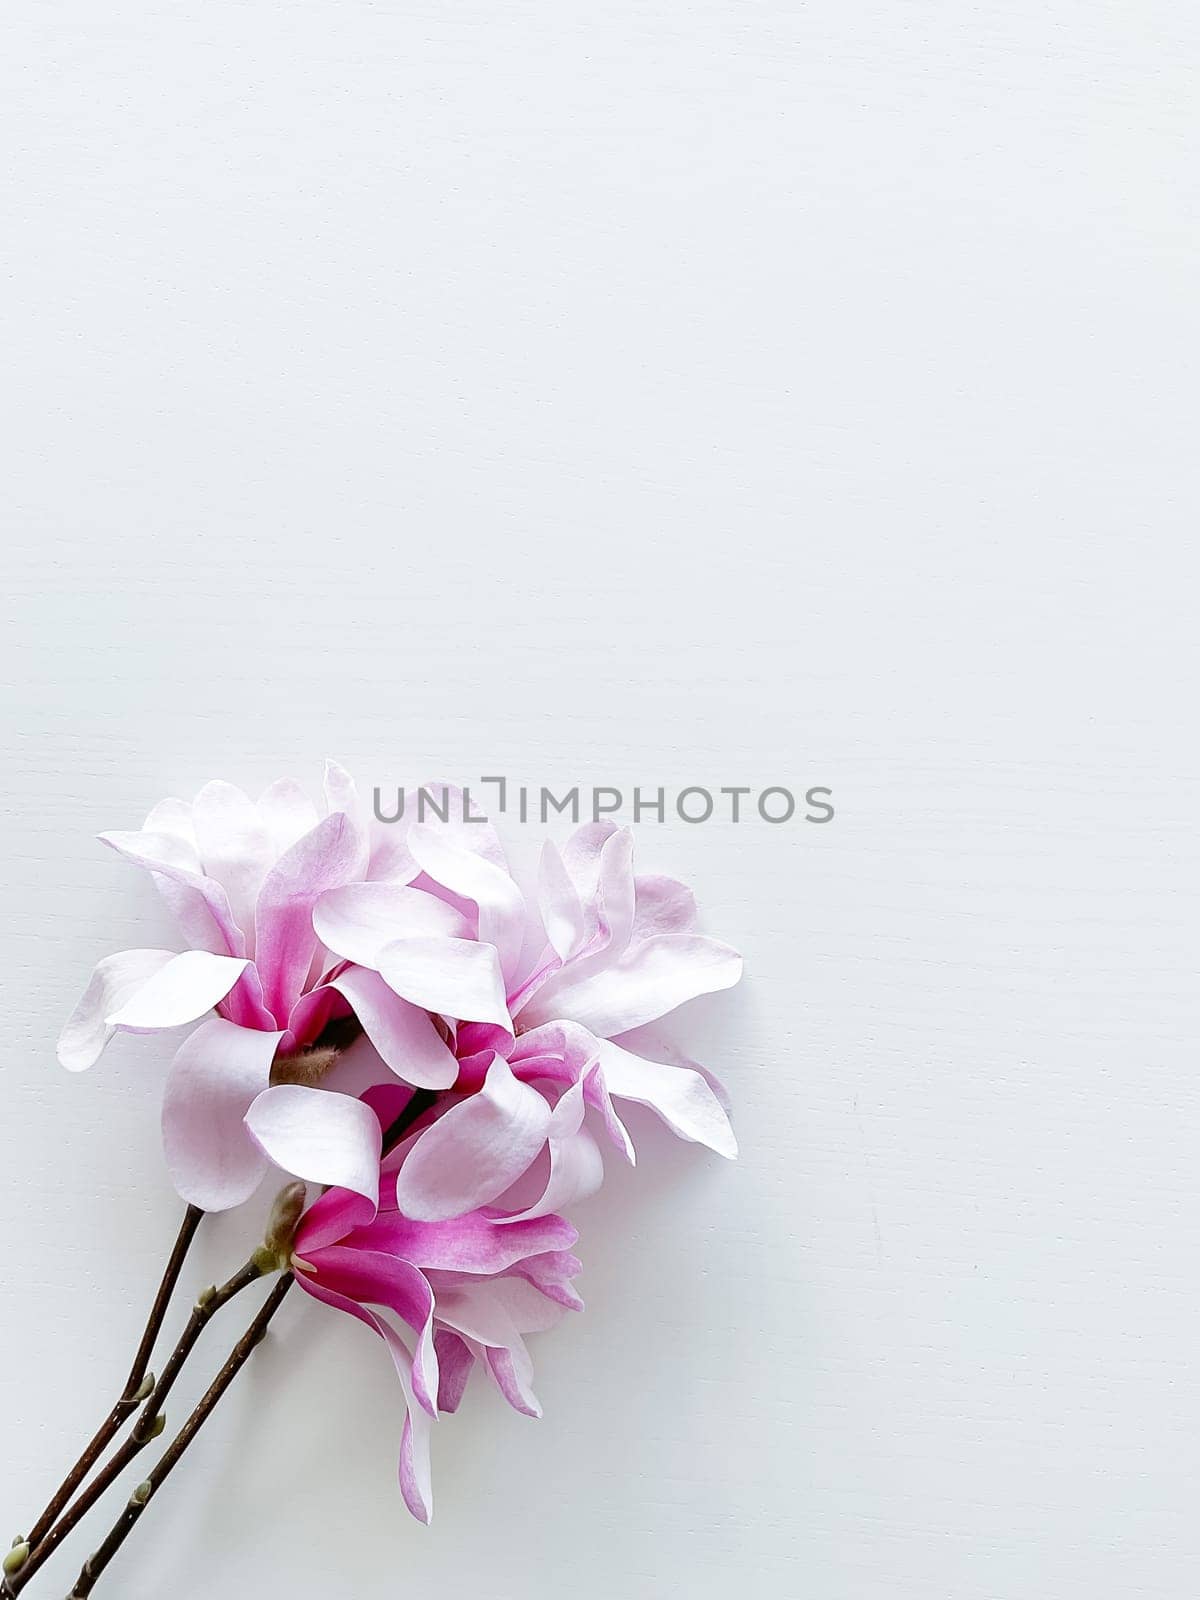 Closeup photo of pink magnolia flowers, isolated on white background. With empty space for text or inscription. For postcard, advertisement or website.